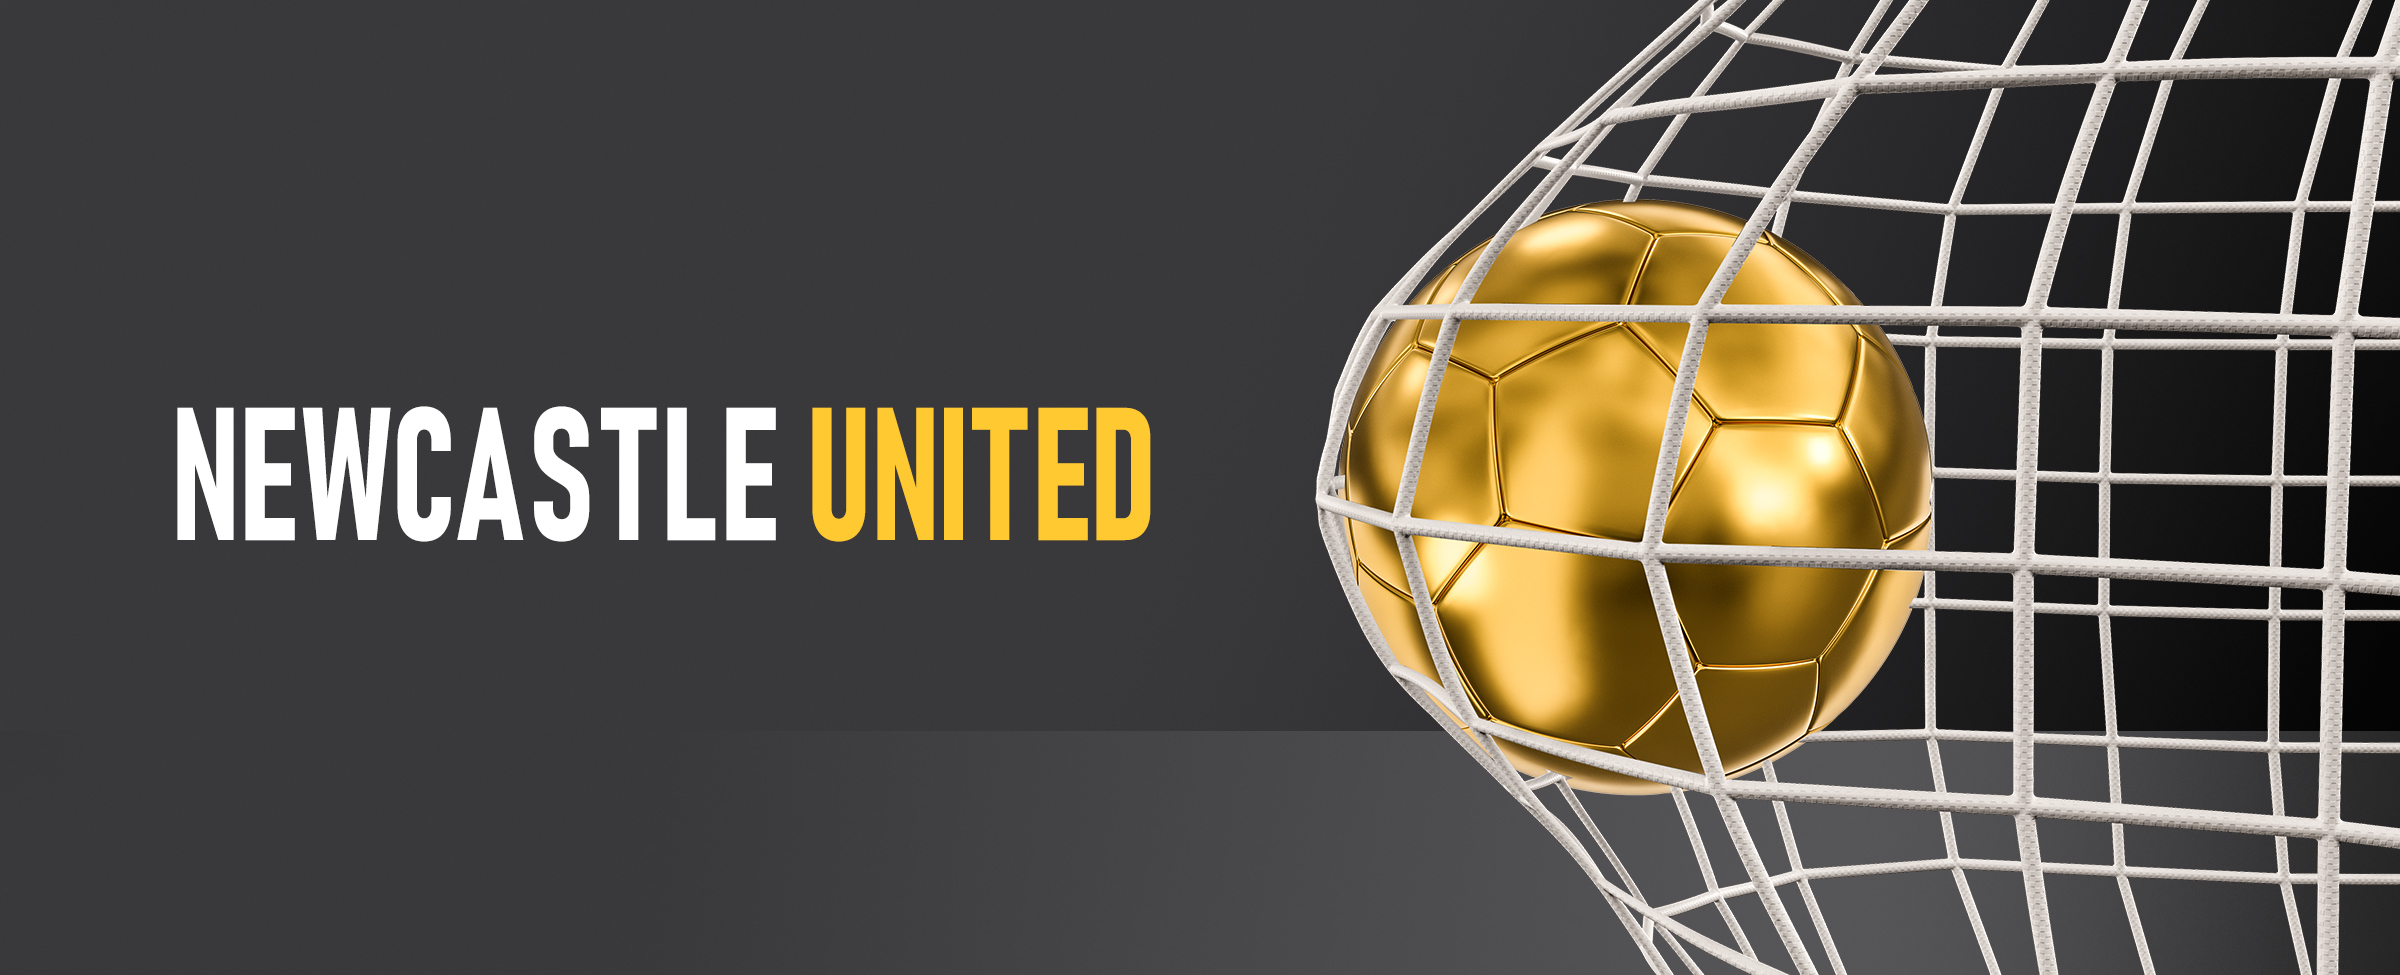 A golden ball hits the back of a goal net with the text displaying ‘Newcastle United’. On a dark background.  